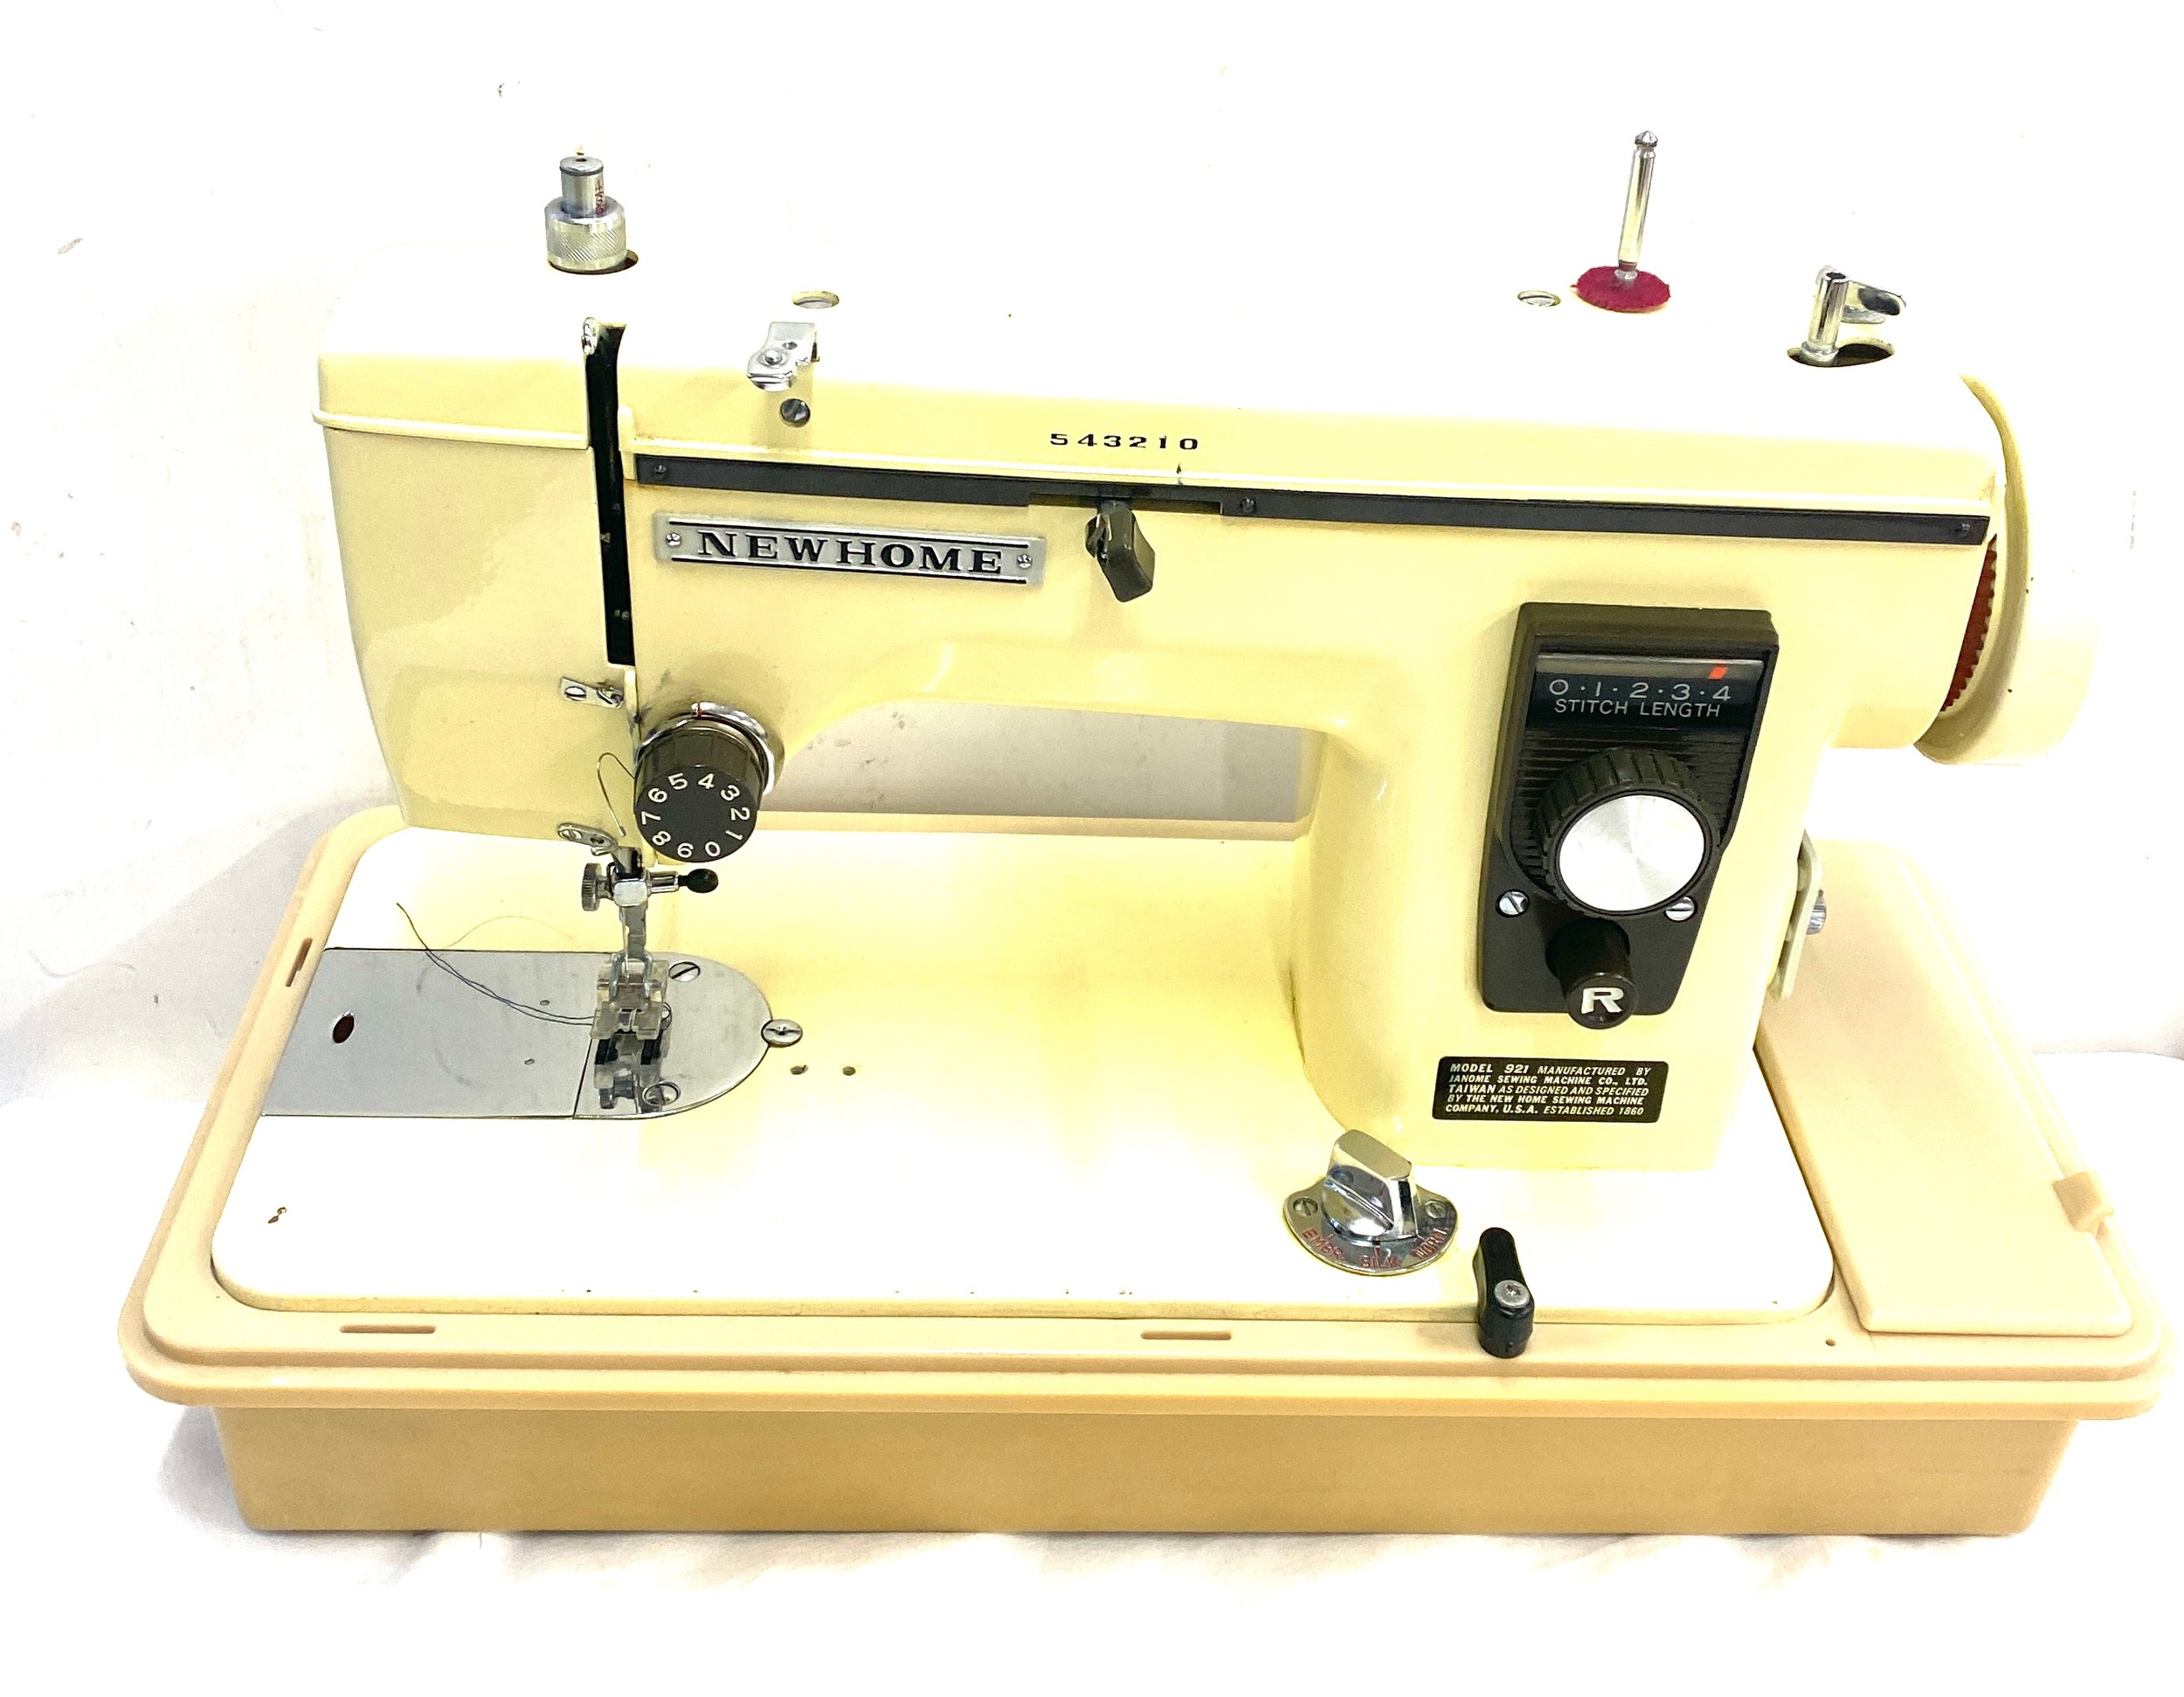 Vintage cased Janome new home sewing machine, 543210, untested - Bild 2 aus 4